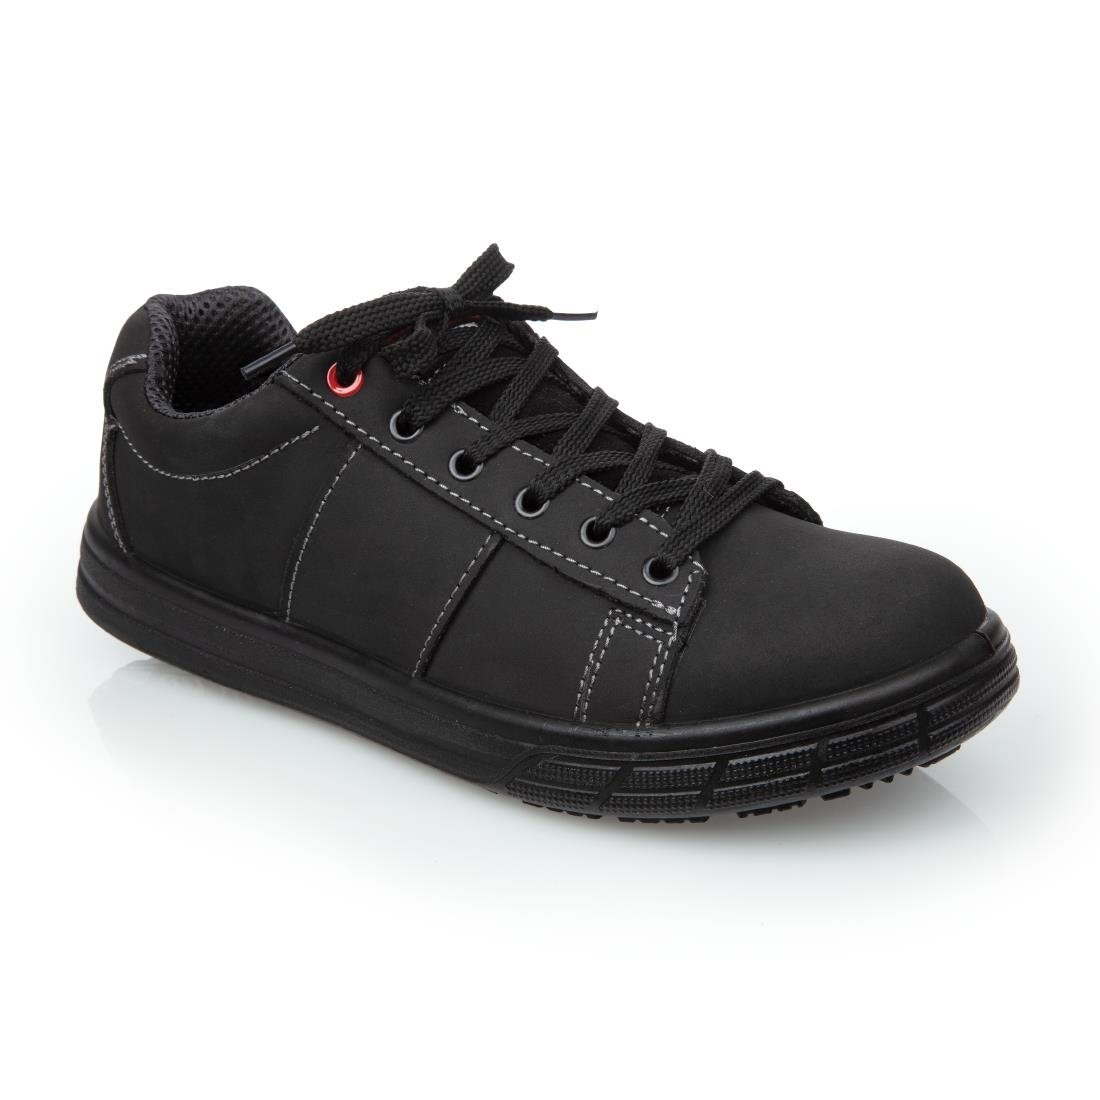 BB420-43 Slipbuster Safety Trainers Black 43